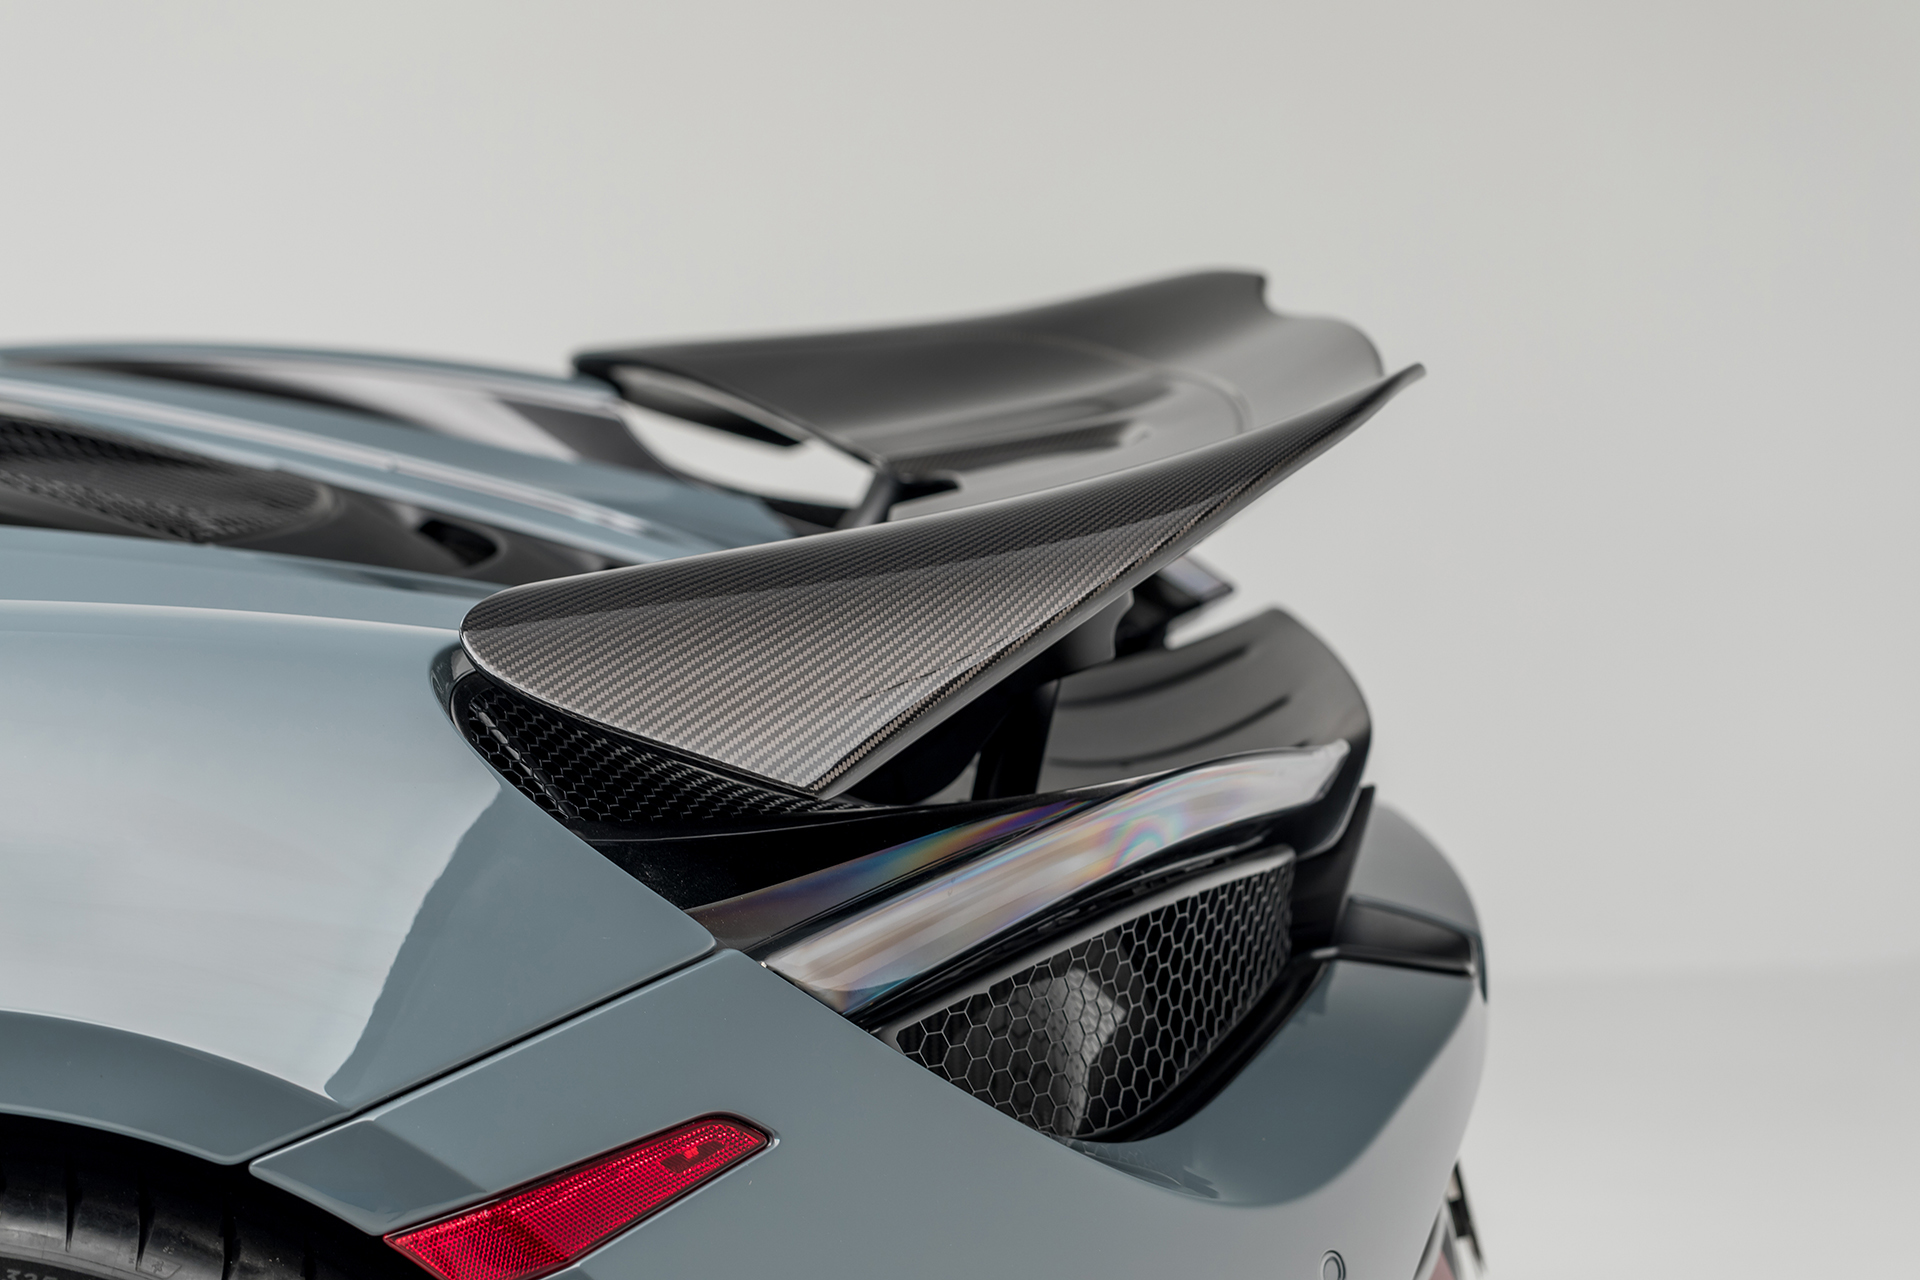 Check our price and buy Vorsteiner Nero body kit for McLaren 720S